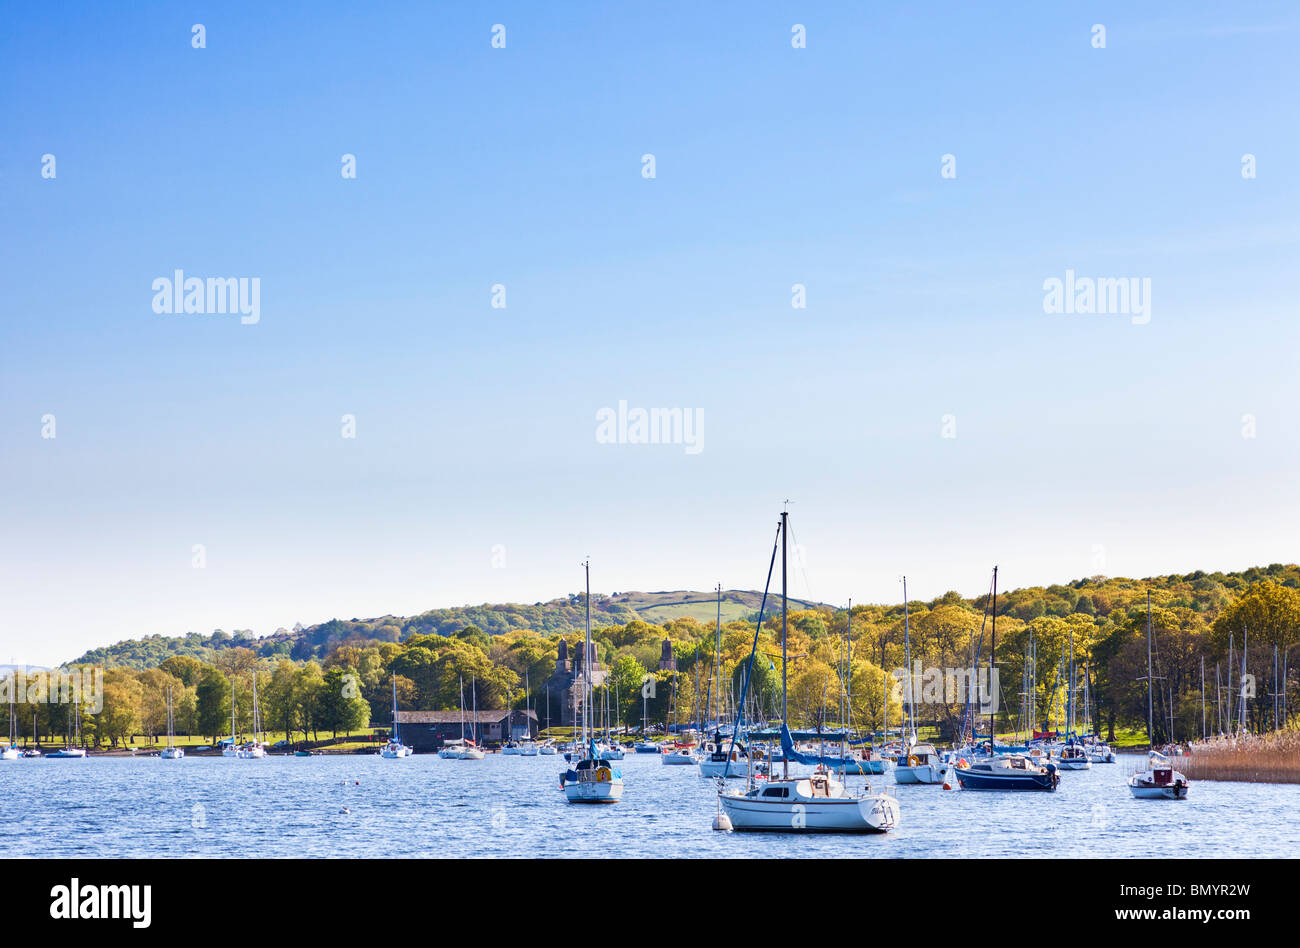 Boats at the Sailing Club on Coniston Water, Lake District Cumbria England UK Stock Photo